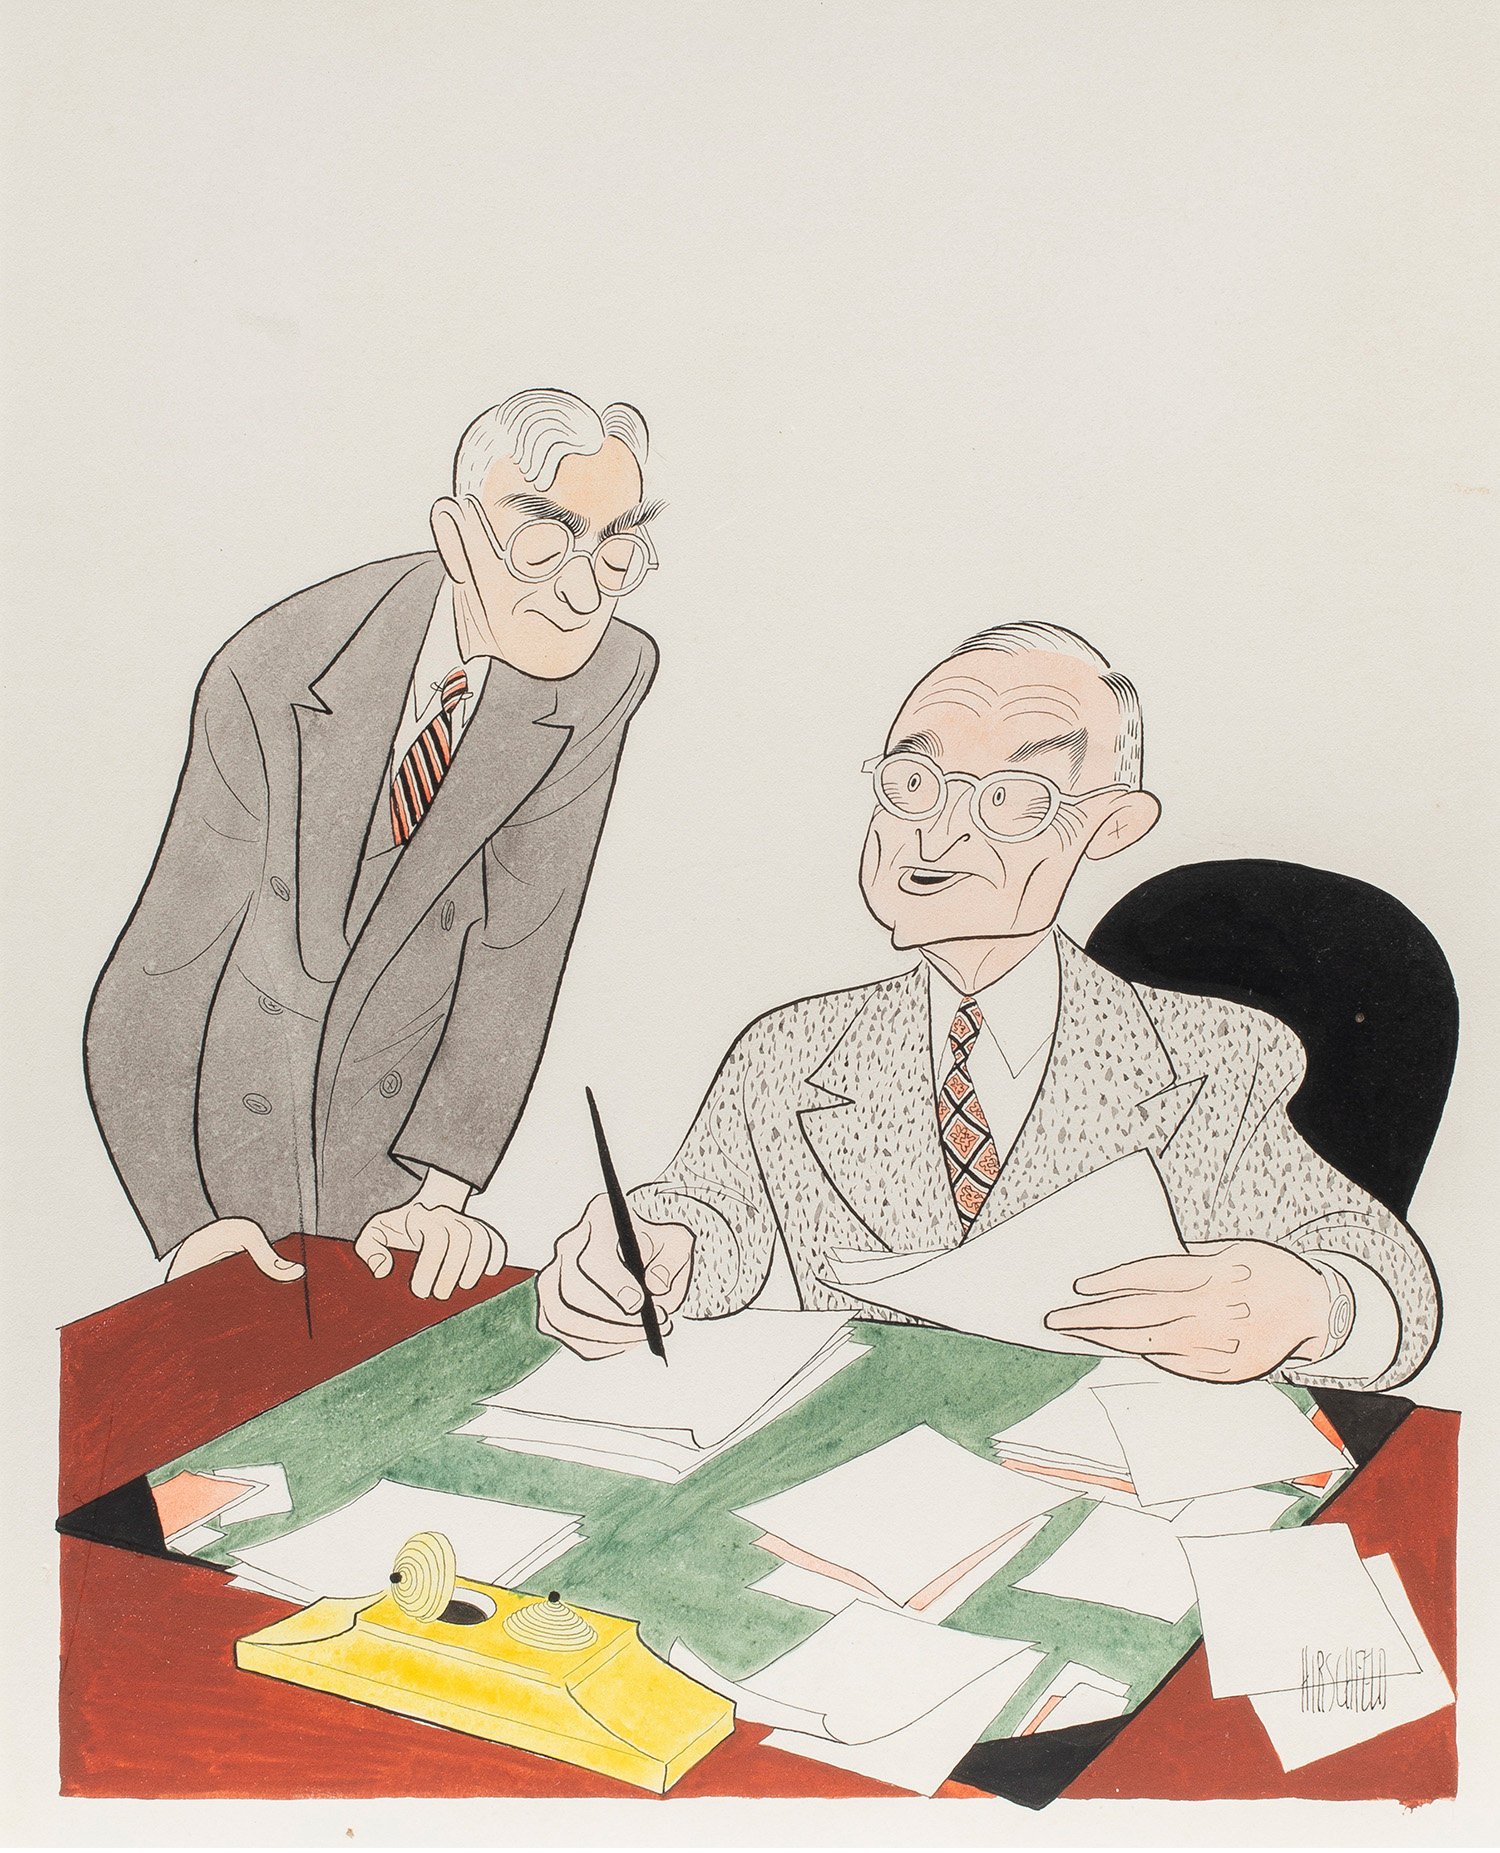 Al Hirschfeld (American, 1903–2003), Harry Truman and Bernard Baruch, He'd Rather Write than Be President, circa 1945, watercolor and ink on paper, 16″ x 13″.